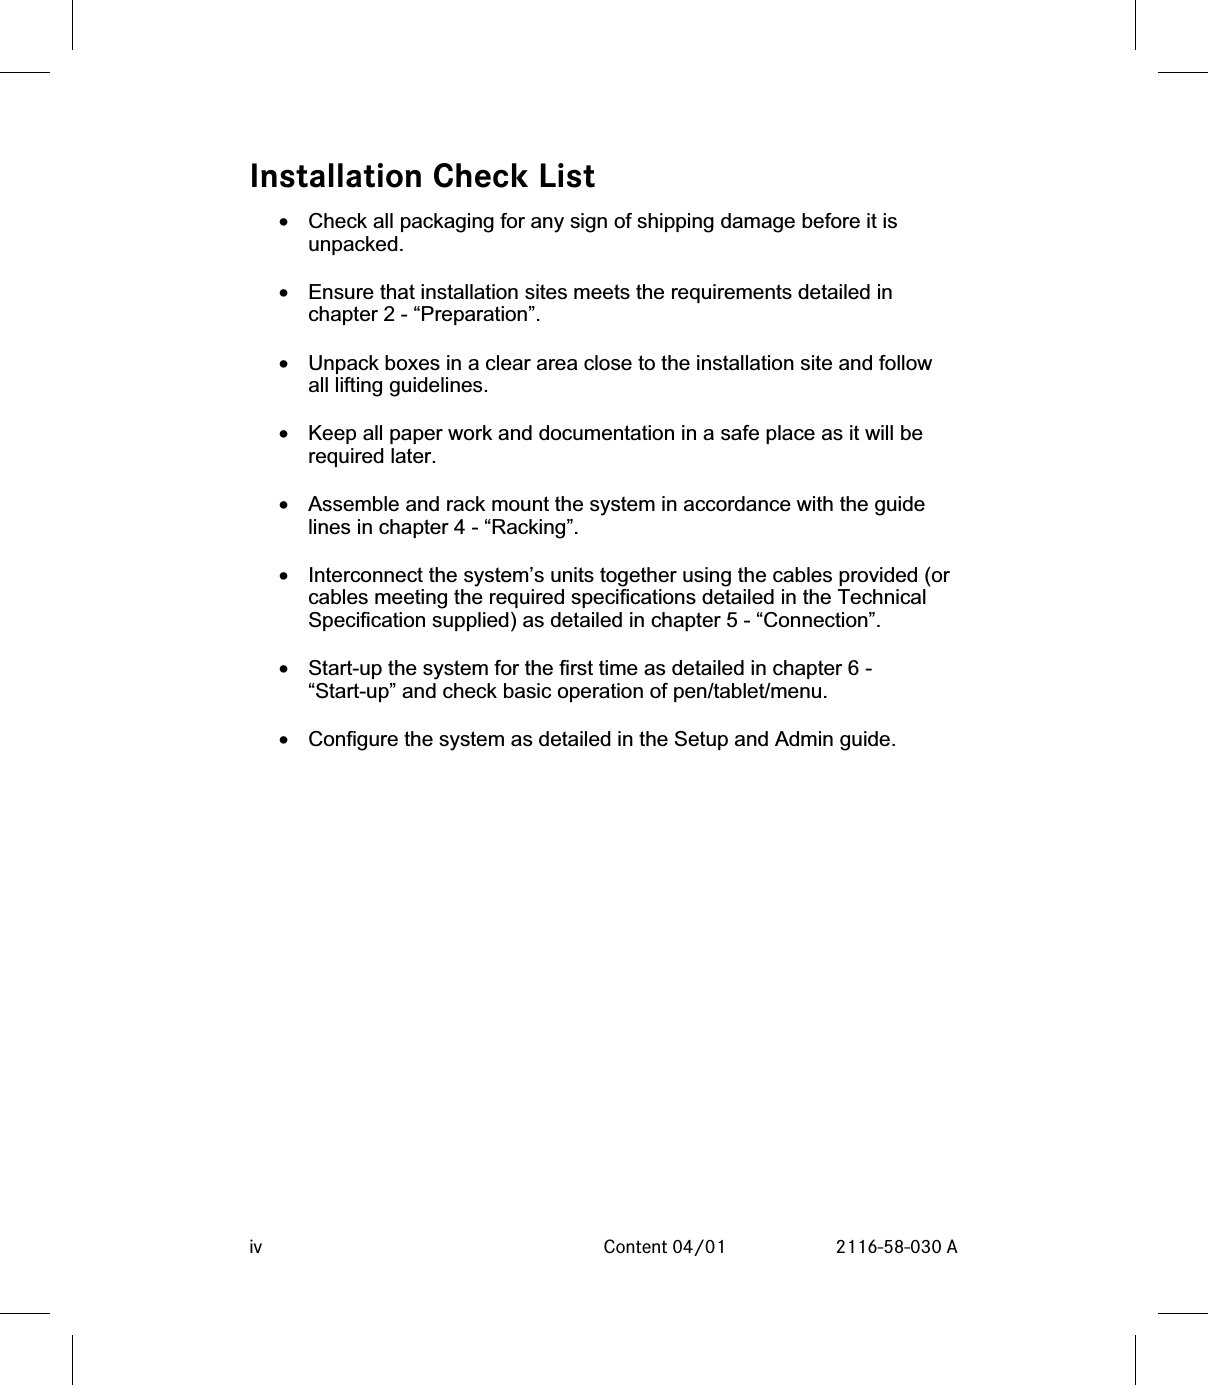 Installation Check List•Check all packaging for any sign of shipping damage before it isunpacked.•Ensure that installation sites meets the requirements detailed inchapter 2 - “Preparation”.•Unpack boxes in a clear area close to the installation site and followall lifting guidelines.•Keep all paper work and documentation in a safe place as it will berequired later.•Assemble and rack mount the system in accordance with the guidelines in chapter 4 - “Racking”.•Interconnect the system’s units together using the cables provided (orcables meeting the required specifications detailed in the TechnicalSpecification supplied) as detailed in chapter 5 - “Connection”.•Start-up the system for the first time as detailed in chapter 6 -“Start-up” and check basic operation of pen/tablet/menu.•Configure the system as detailed in the Setup and Admin guide.iv Content 04/01 2116-58-030 A